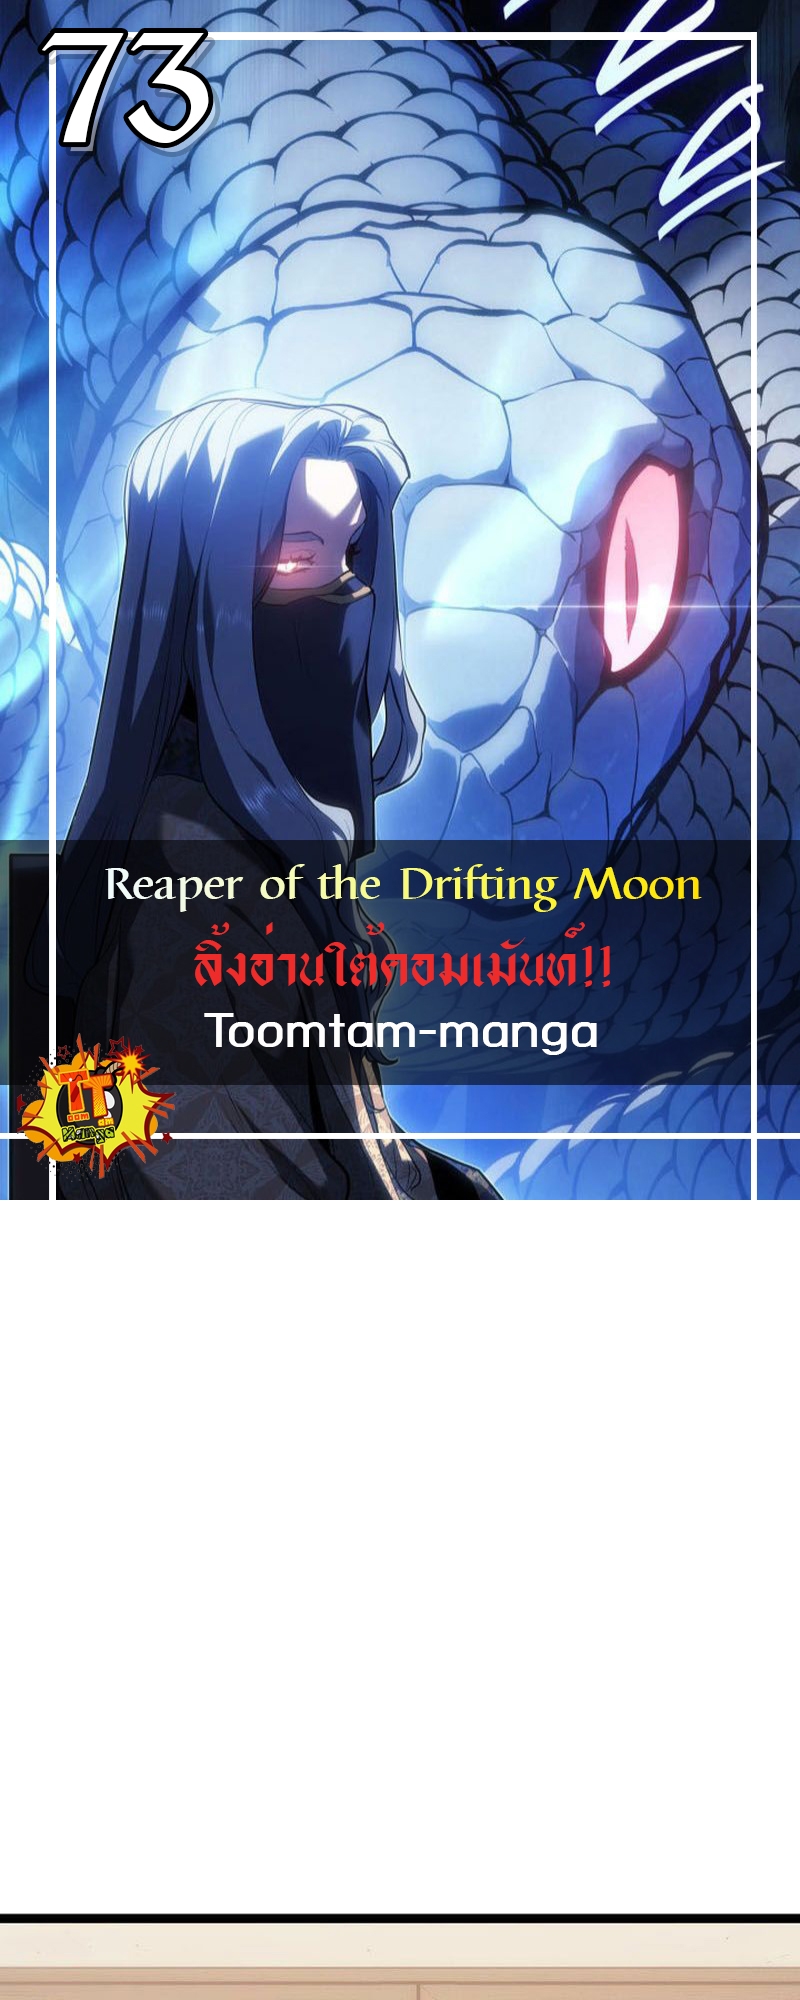 Reaper of the Drifting Moon 73 1 2 25670001